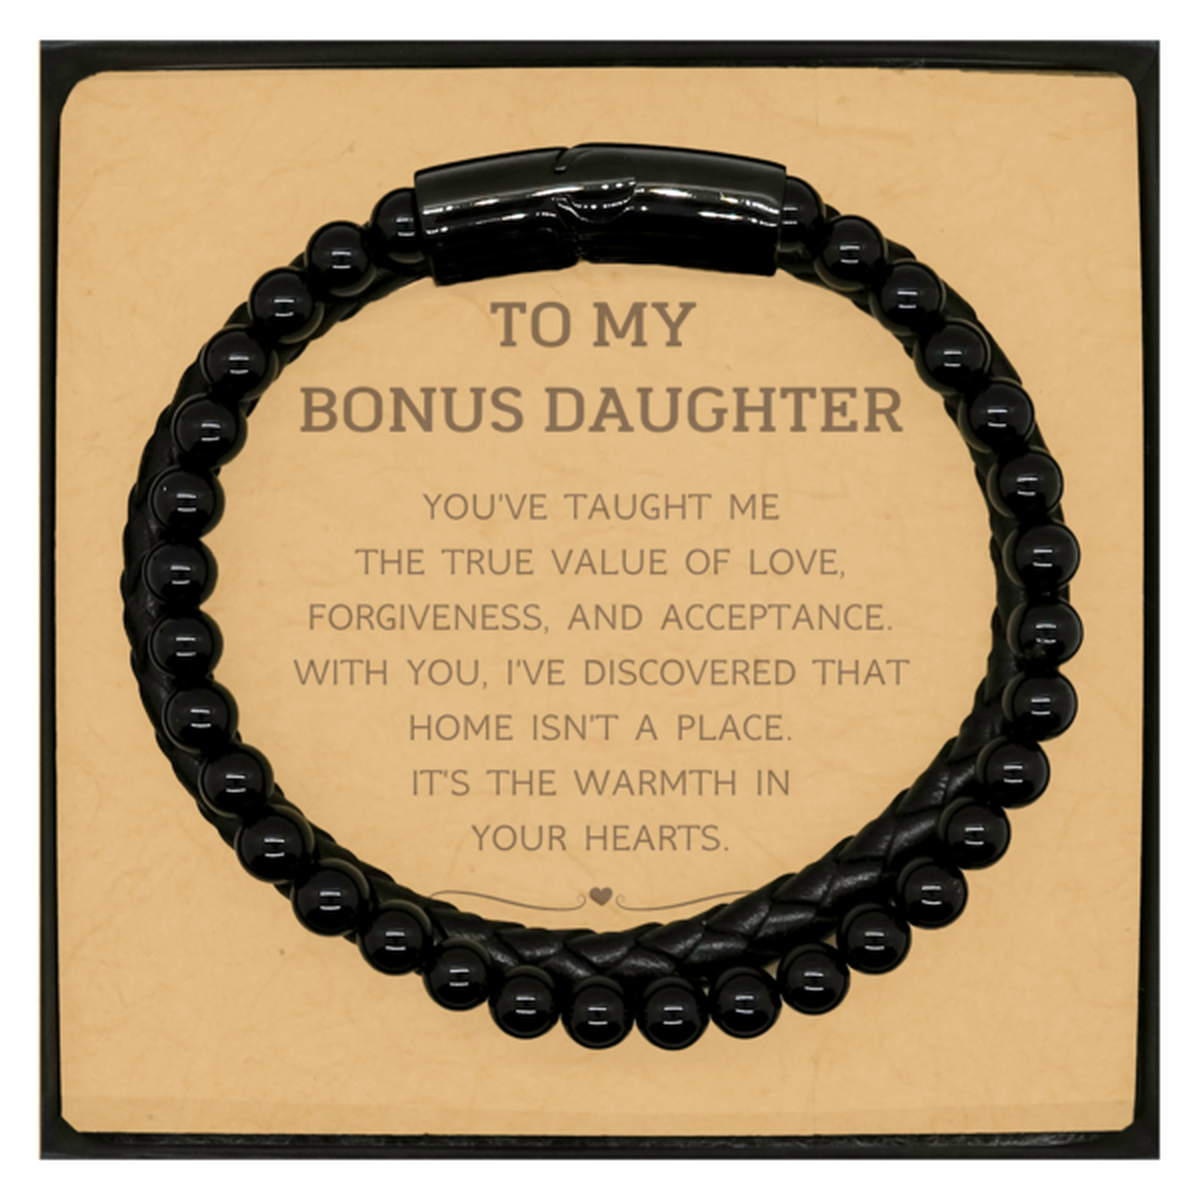 To My Bonus Daughter Gifts, You've taught me the true value of love, Thank You Gifts For Bonus Daughter, Birthday Christmas Stone Leather Bracelets For Bonus Daughter